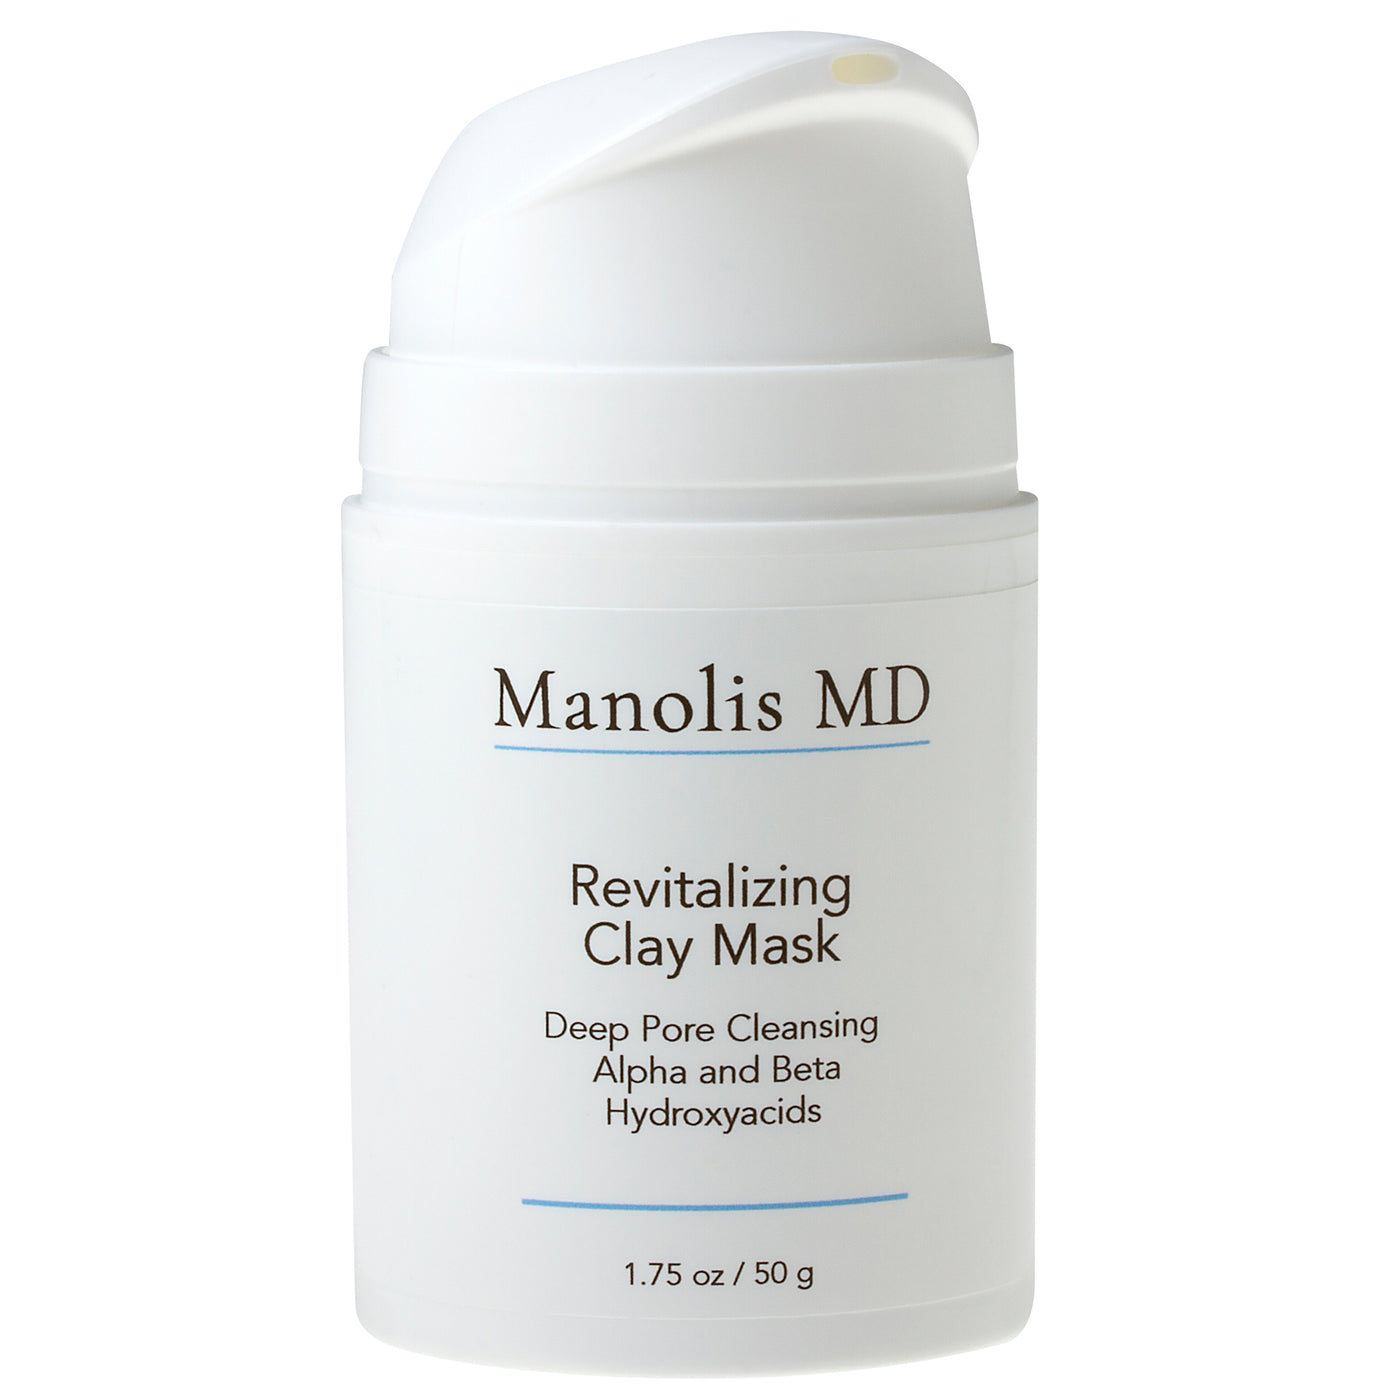 The Revitalizing Clay Mask Contains powerful antioxidants and alpha and beta hydroxyacids, to calm and tone the skin.